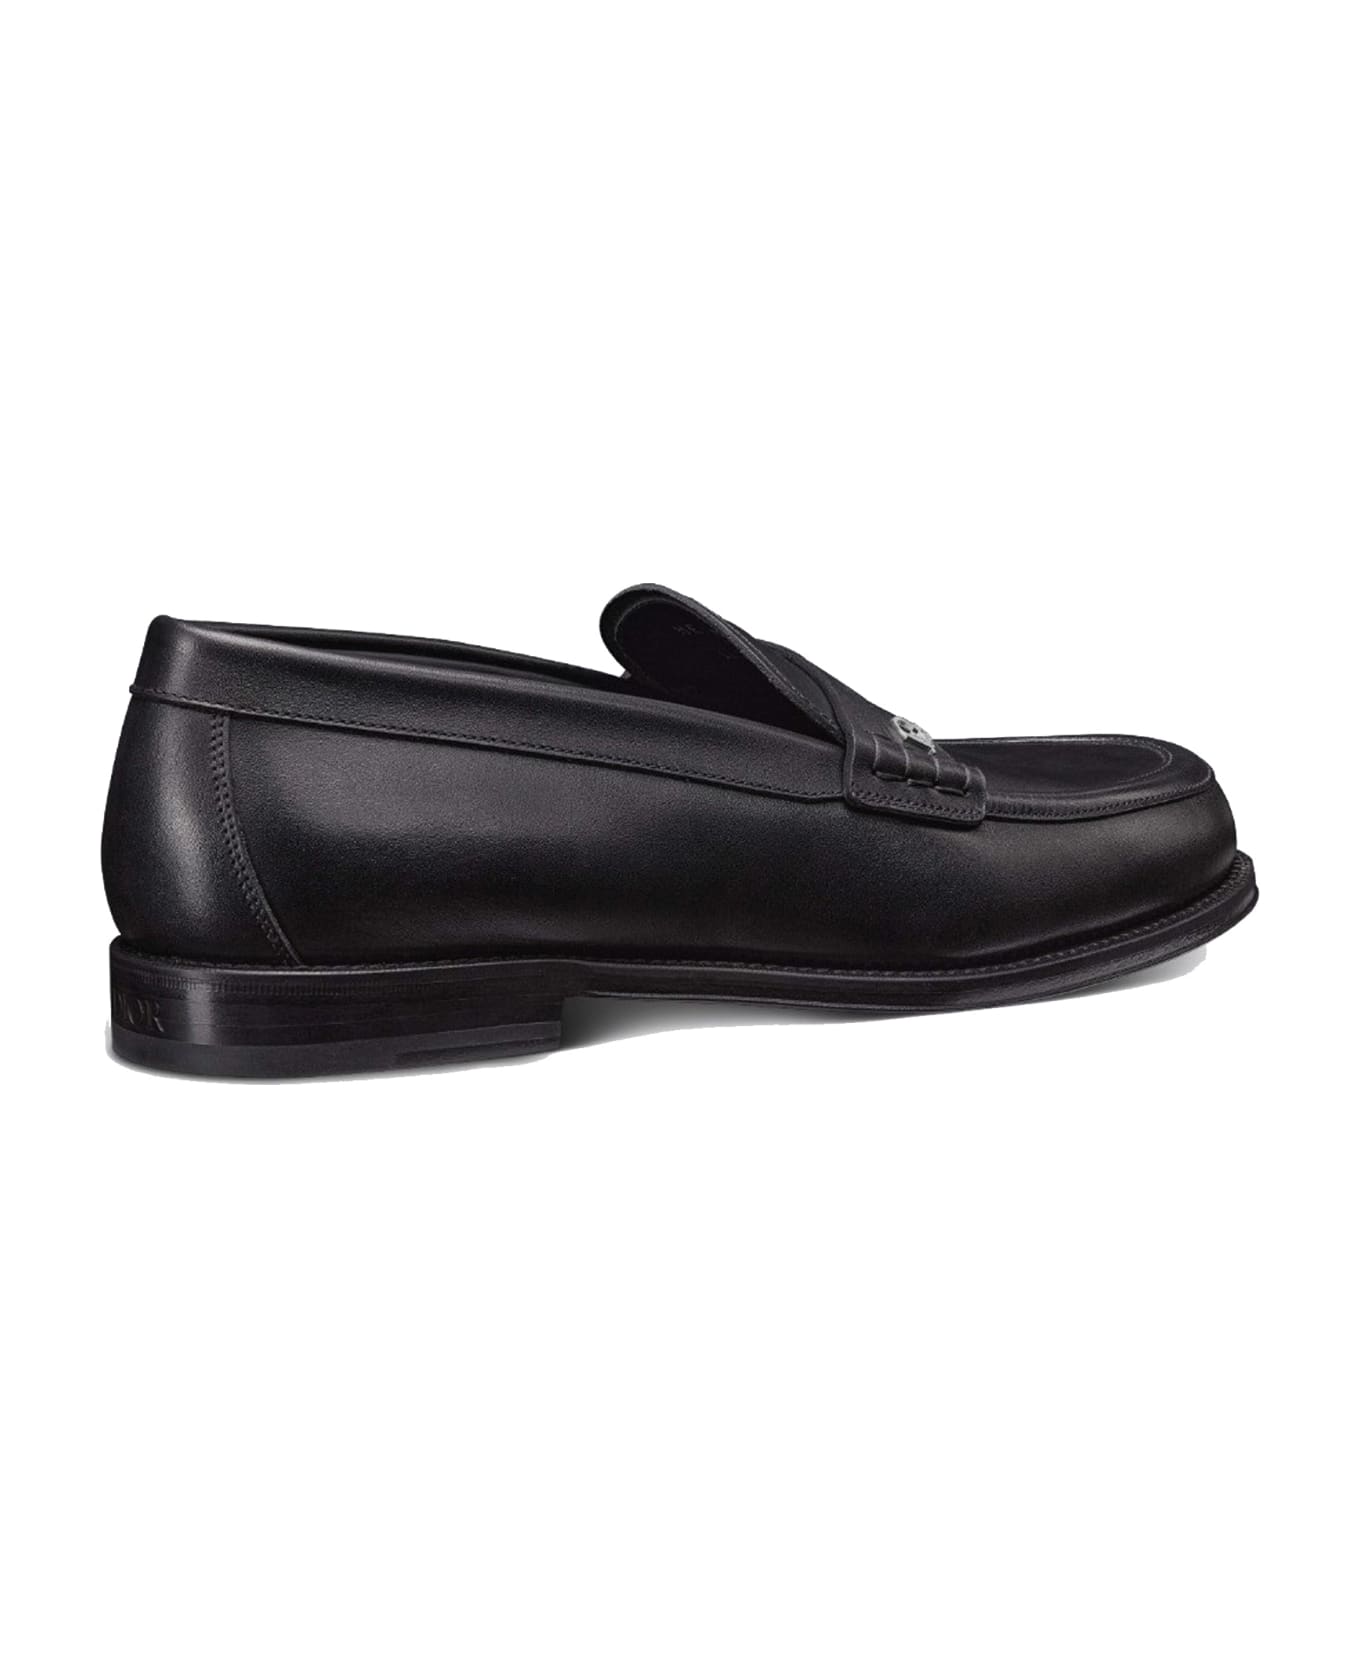 Dior Leather Loafers - Black ローファー＆デッキシューズ